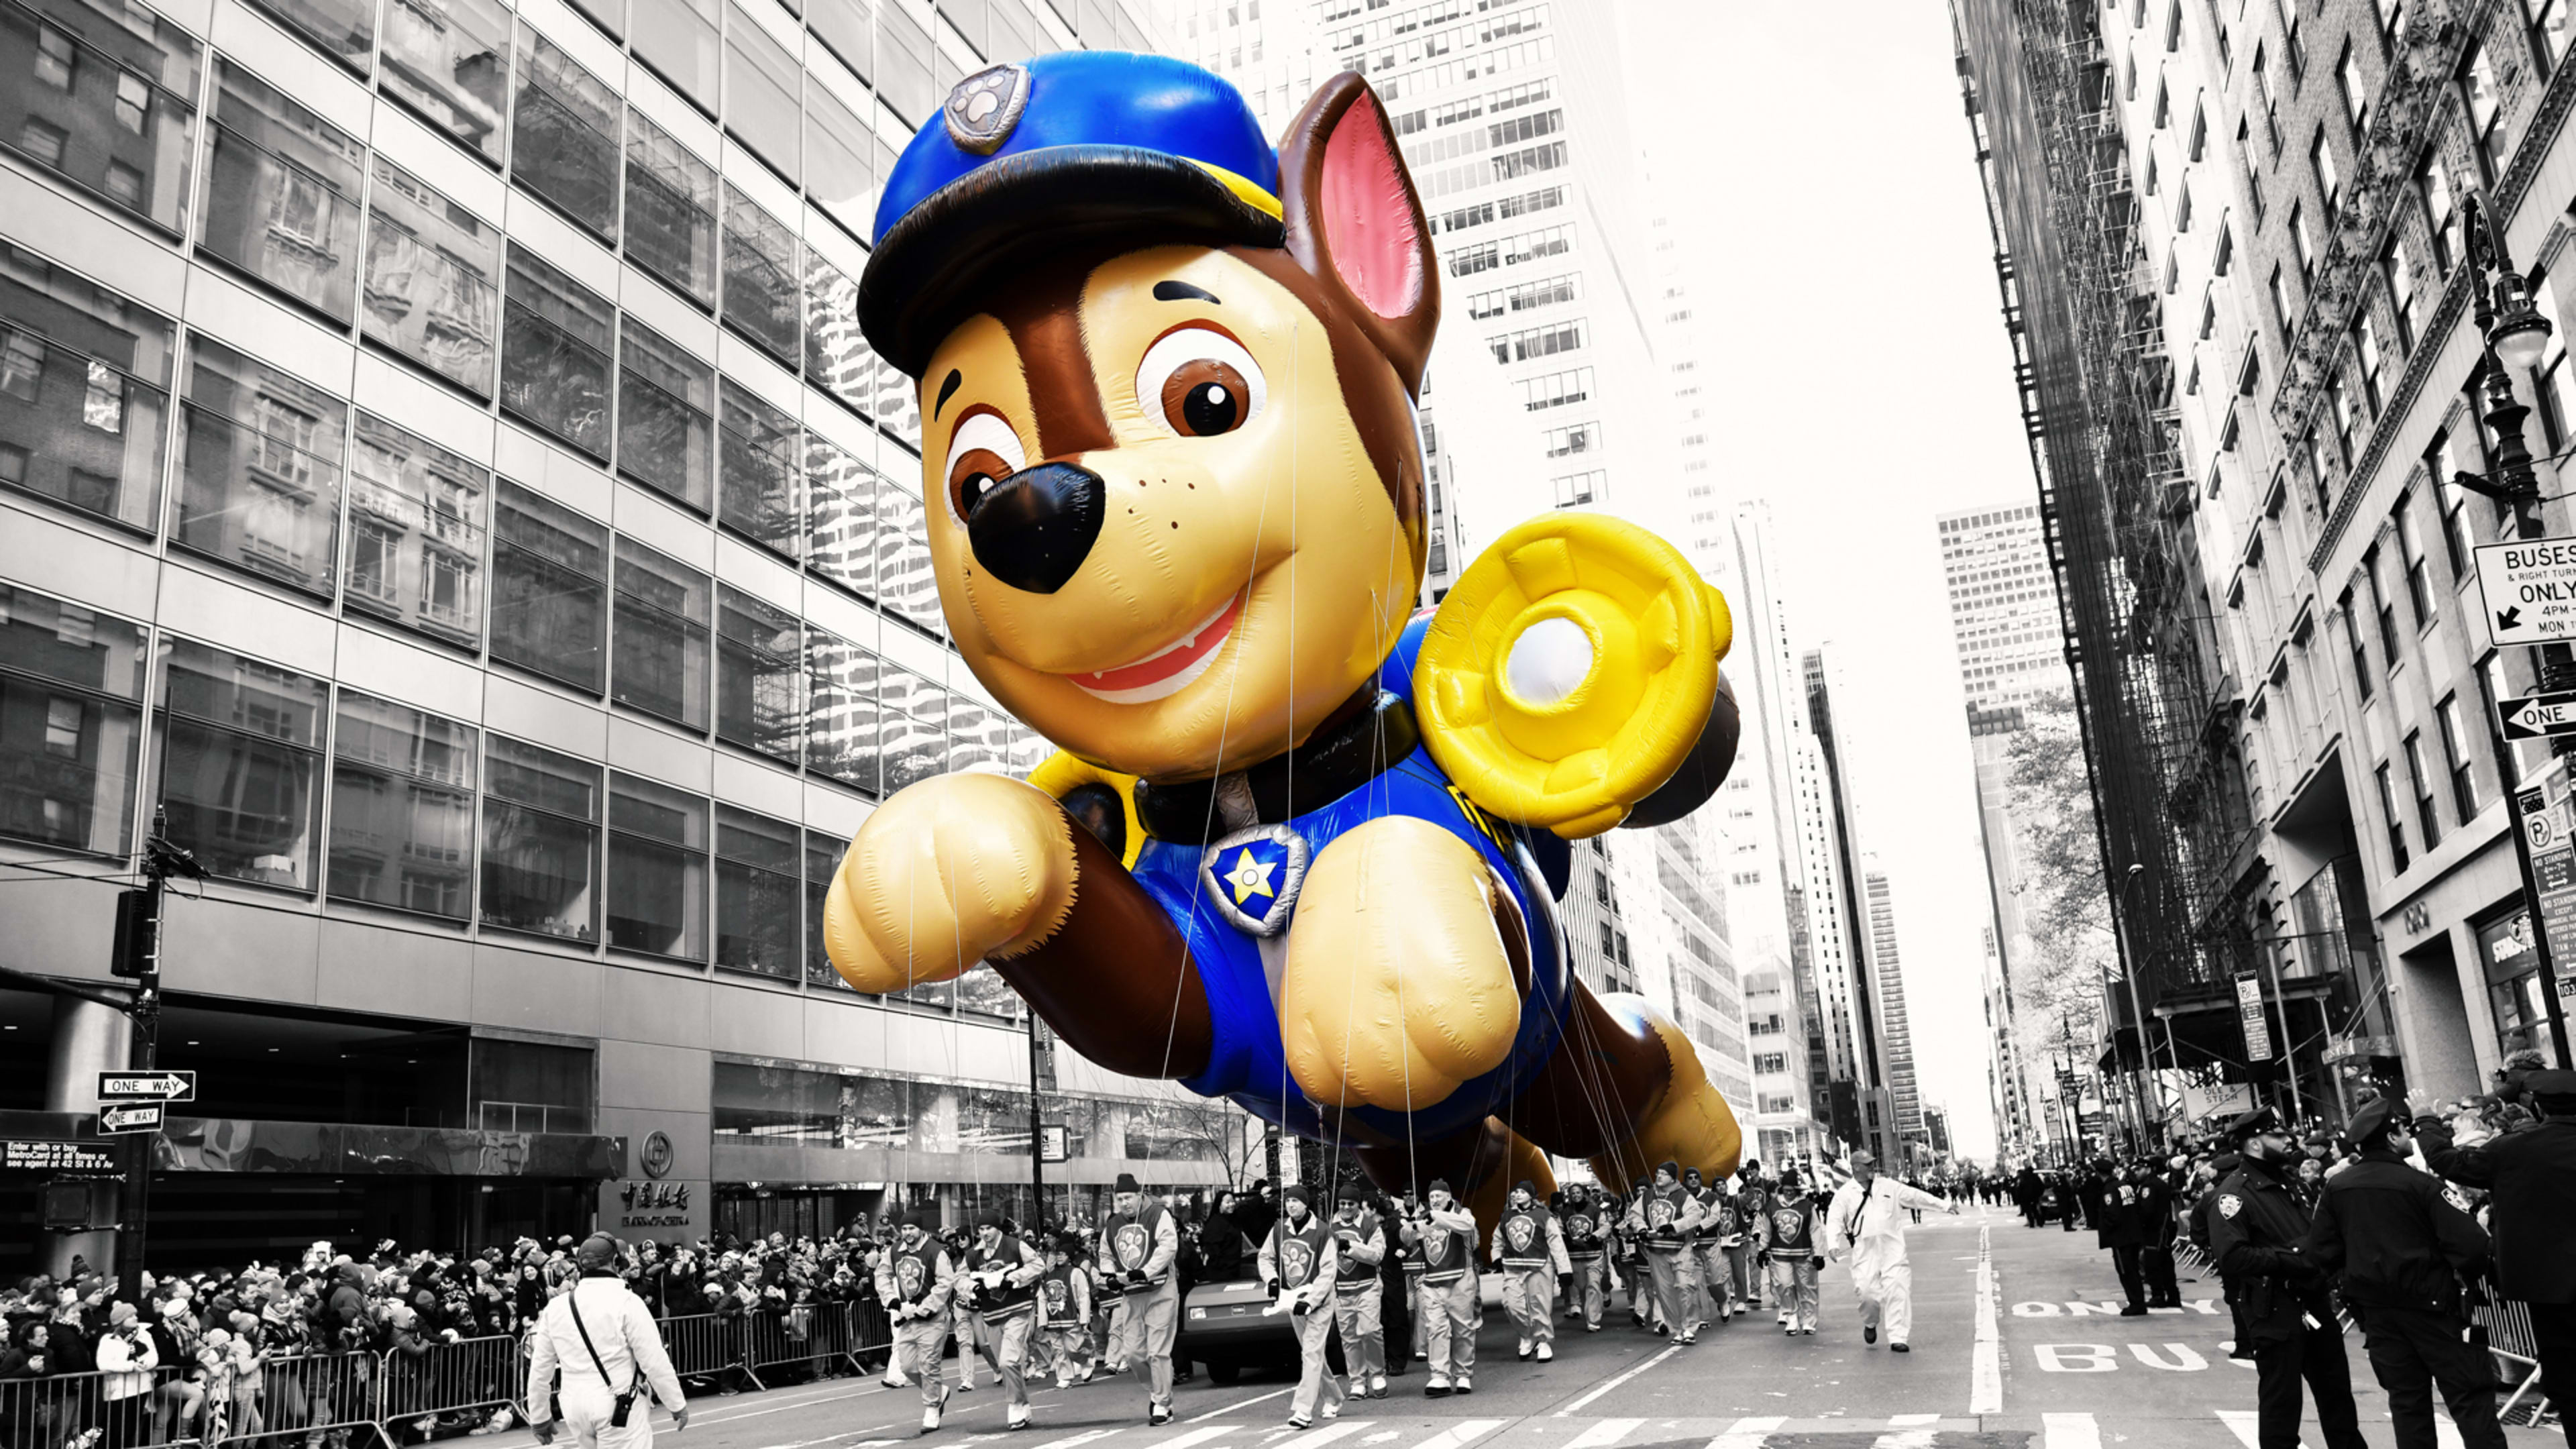 Should ‘Paw Patrol’ be canceled? I asked my 5-year-old